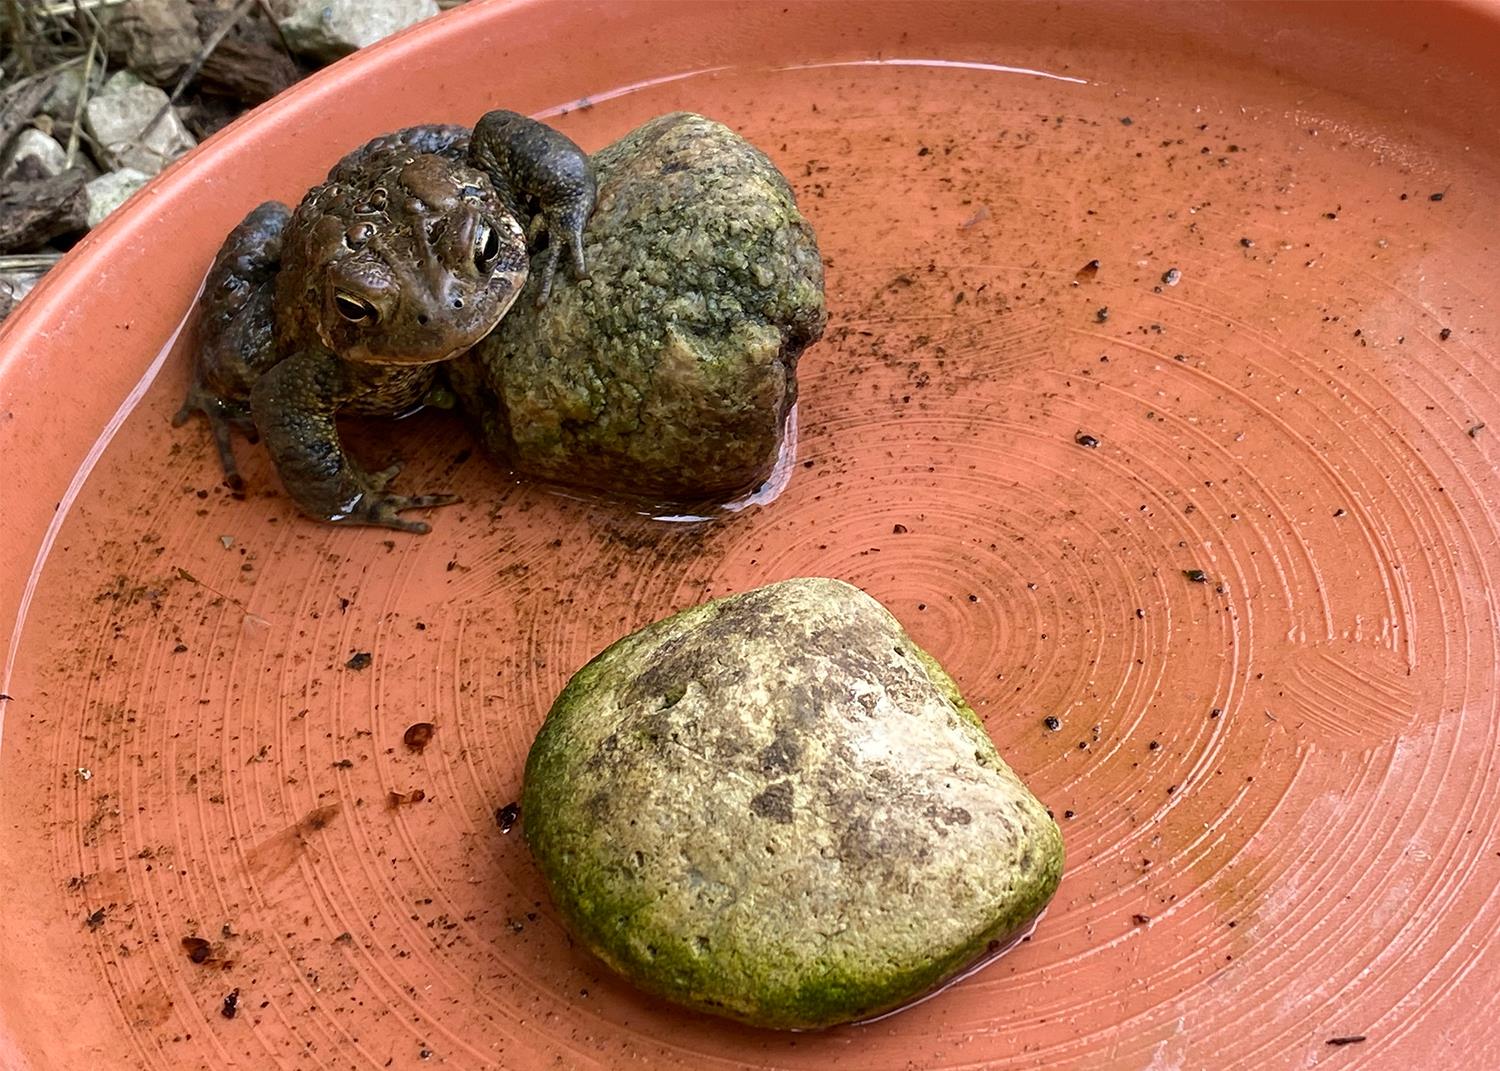 Toad sitting in dish of water